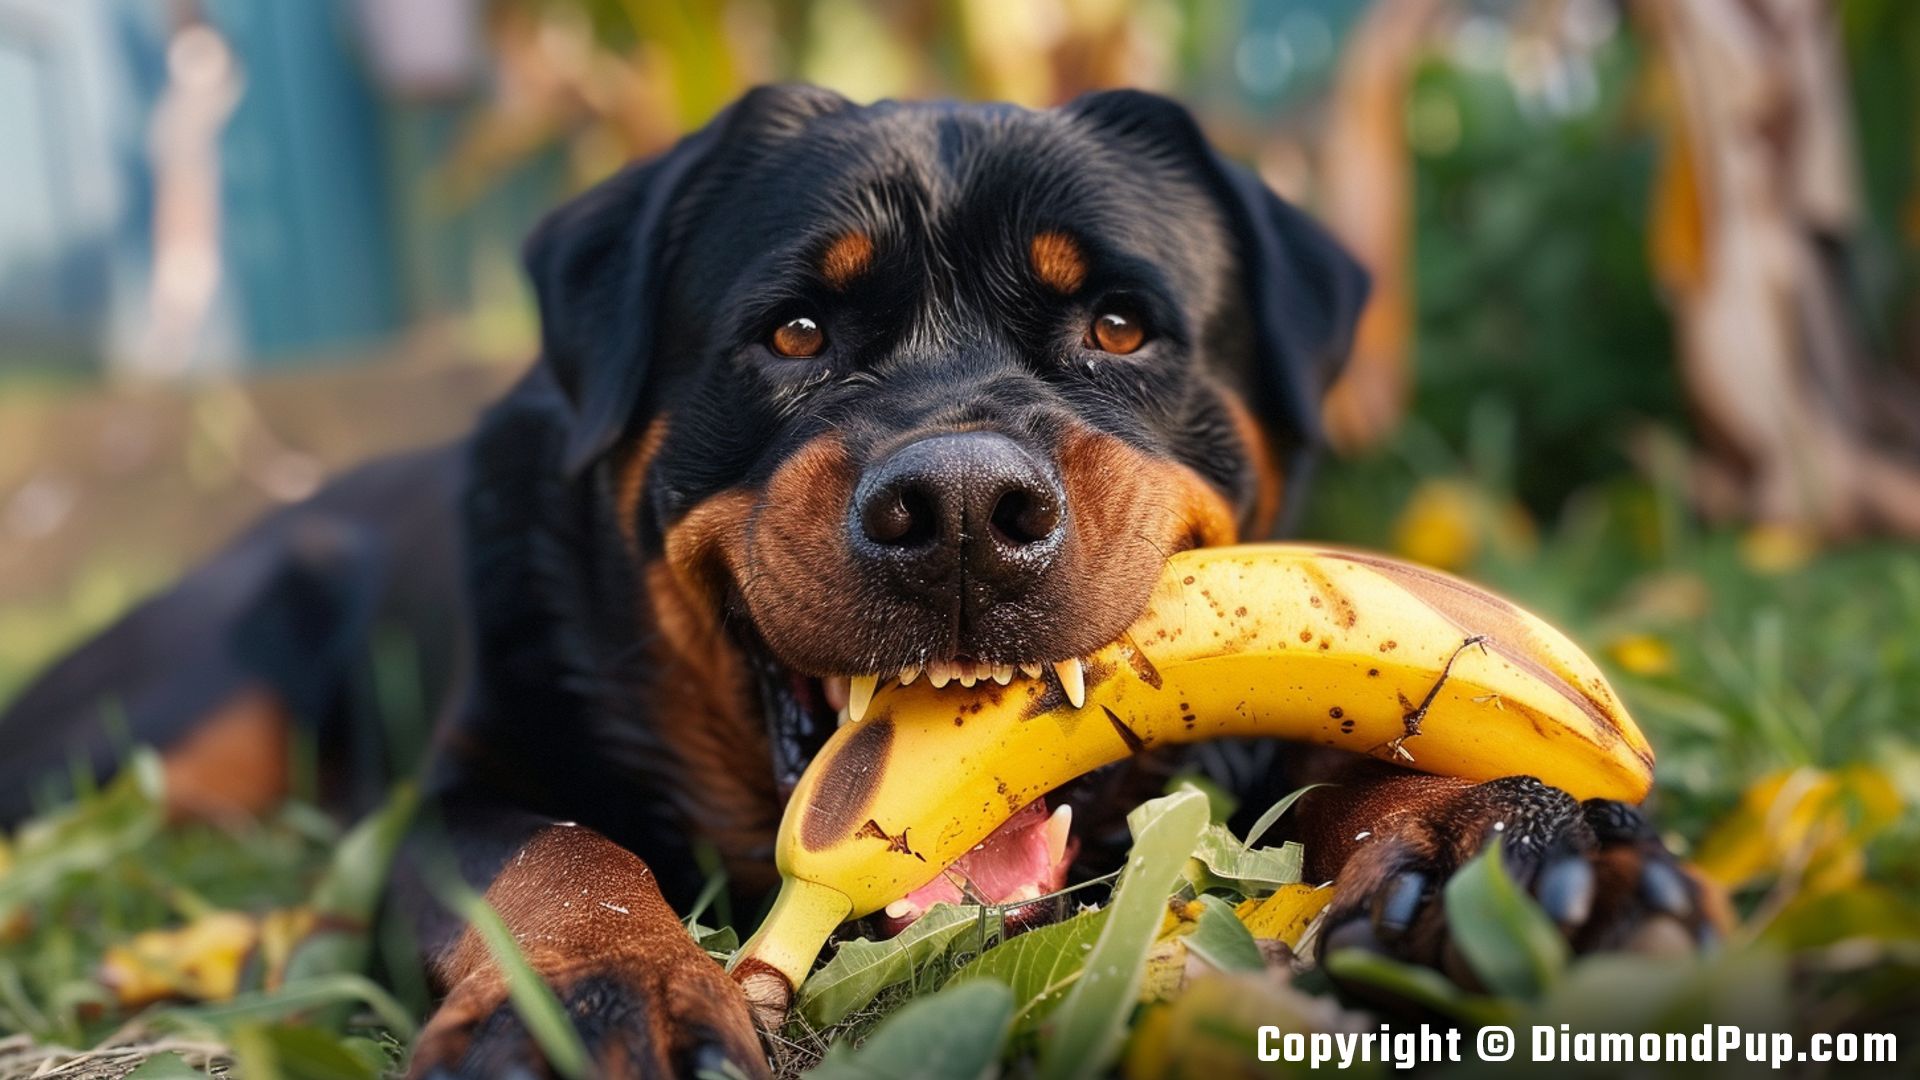 Image of an Adorable Rottweiler Snacking on Banana